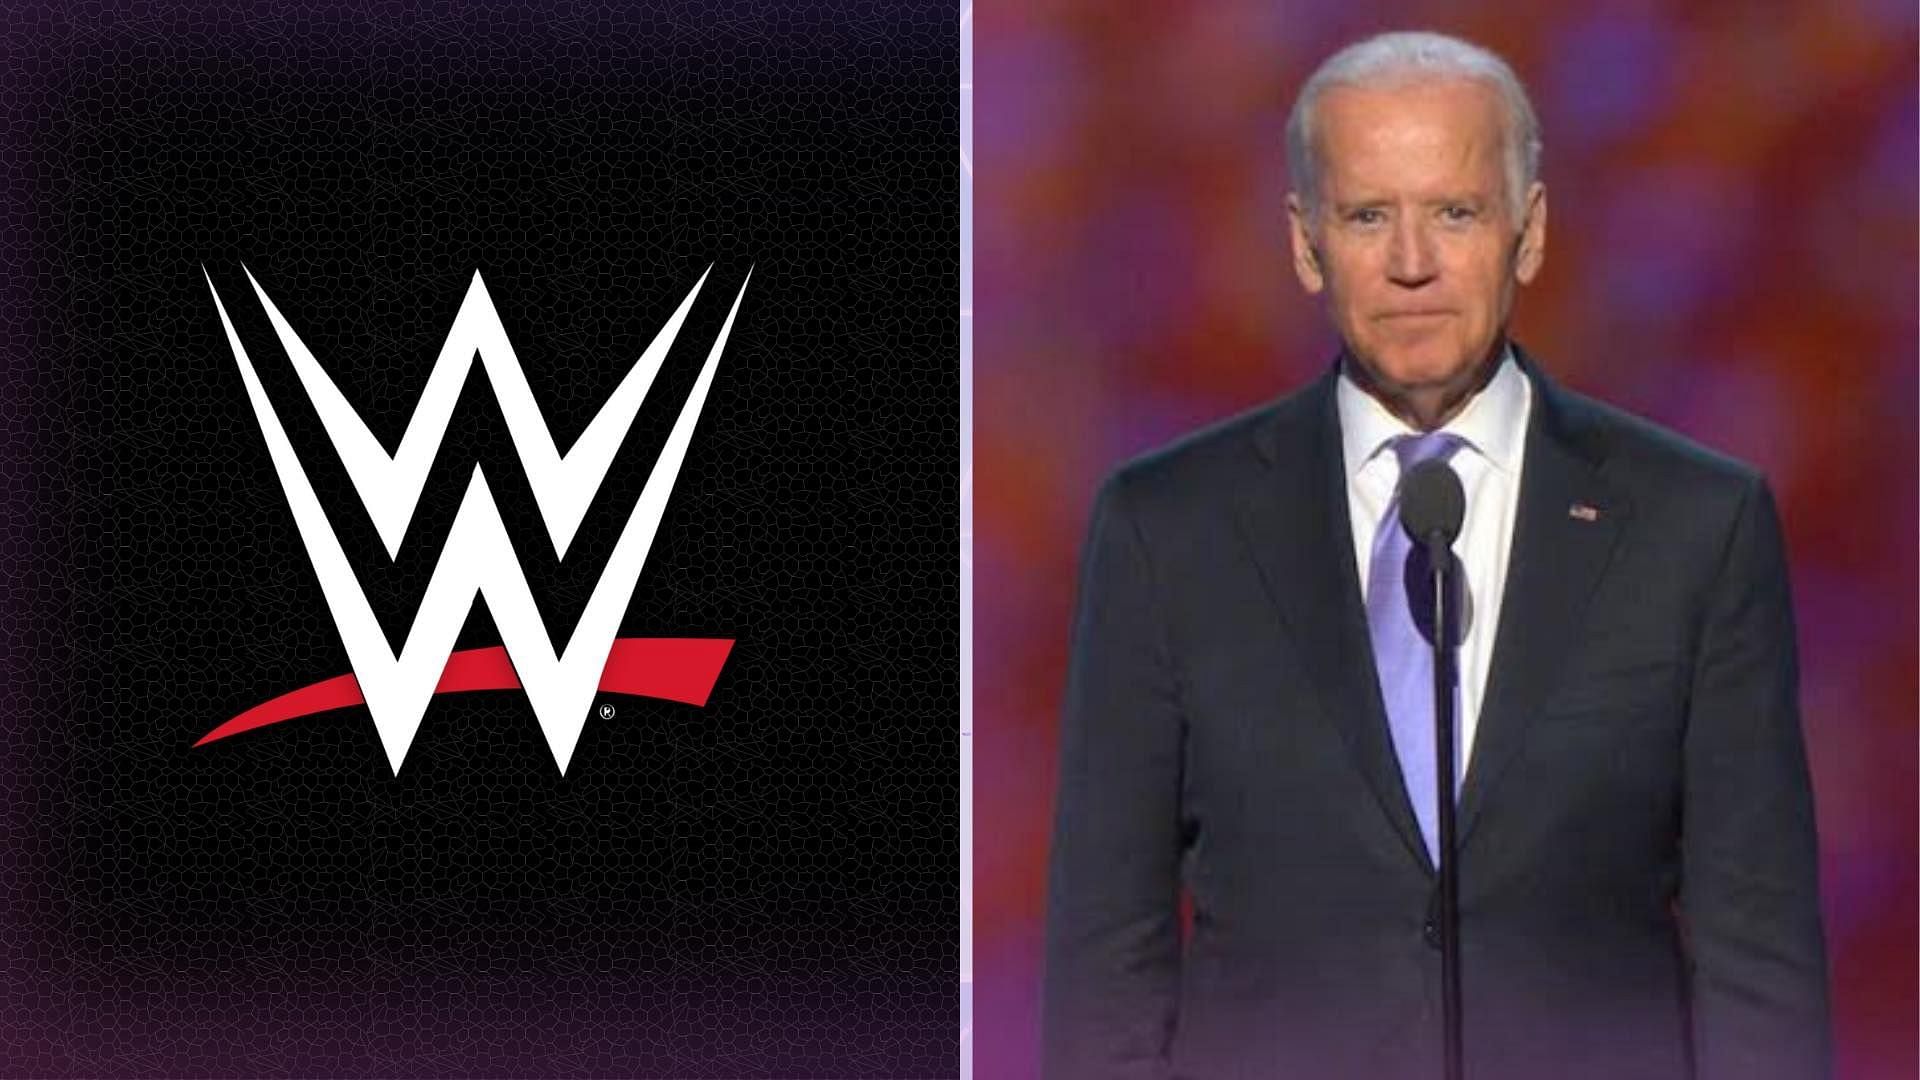 Joe Biden is the 46th President of The United States